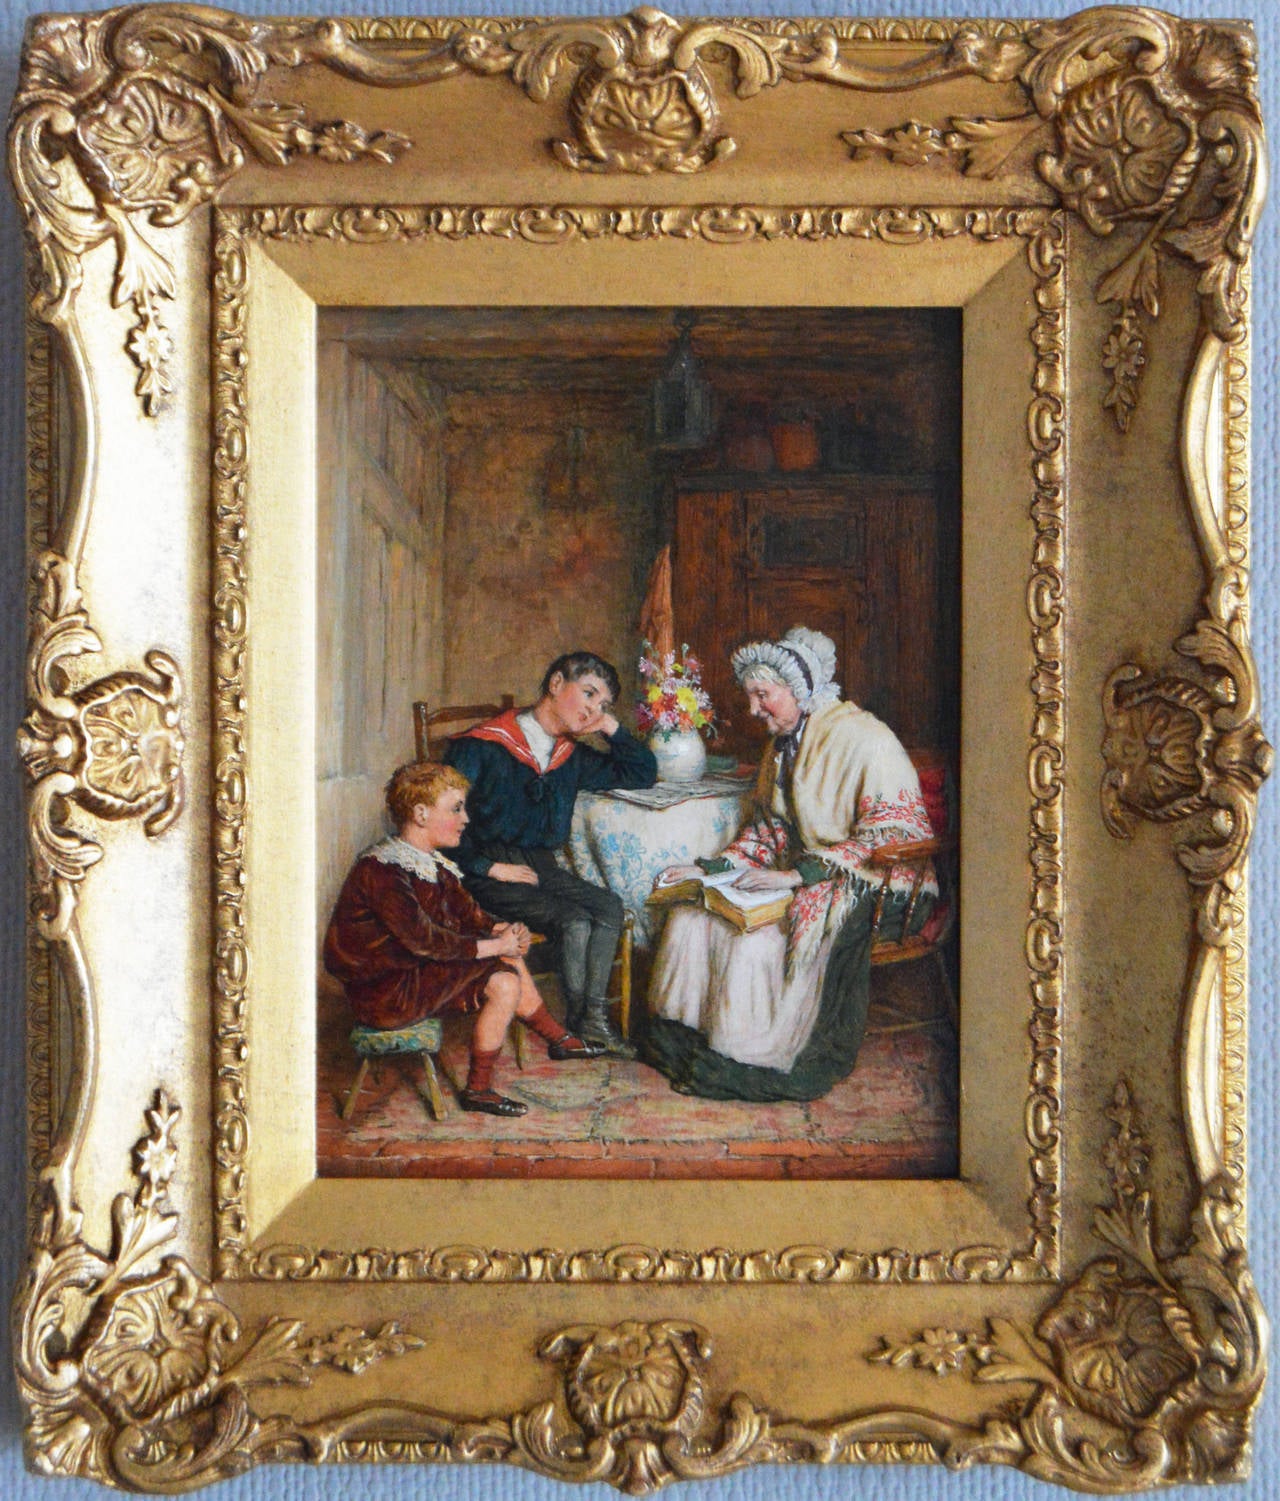 Robert W Wright
British, (b.1850 exh. 1871-1902)
Draughts with Grampa & A Story from Grandma
Oil on panel, pair, both signed & dated 96
Image size: 8 inches x 6 inches
Size including frame: 12½ inches x 10½ inches

Robert William Wright was